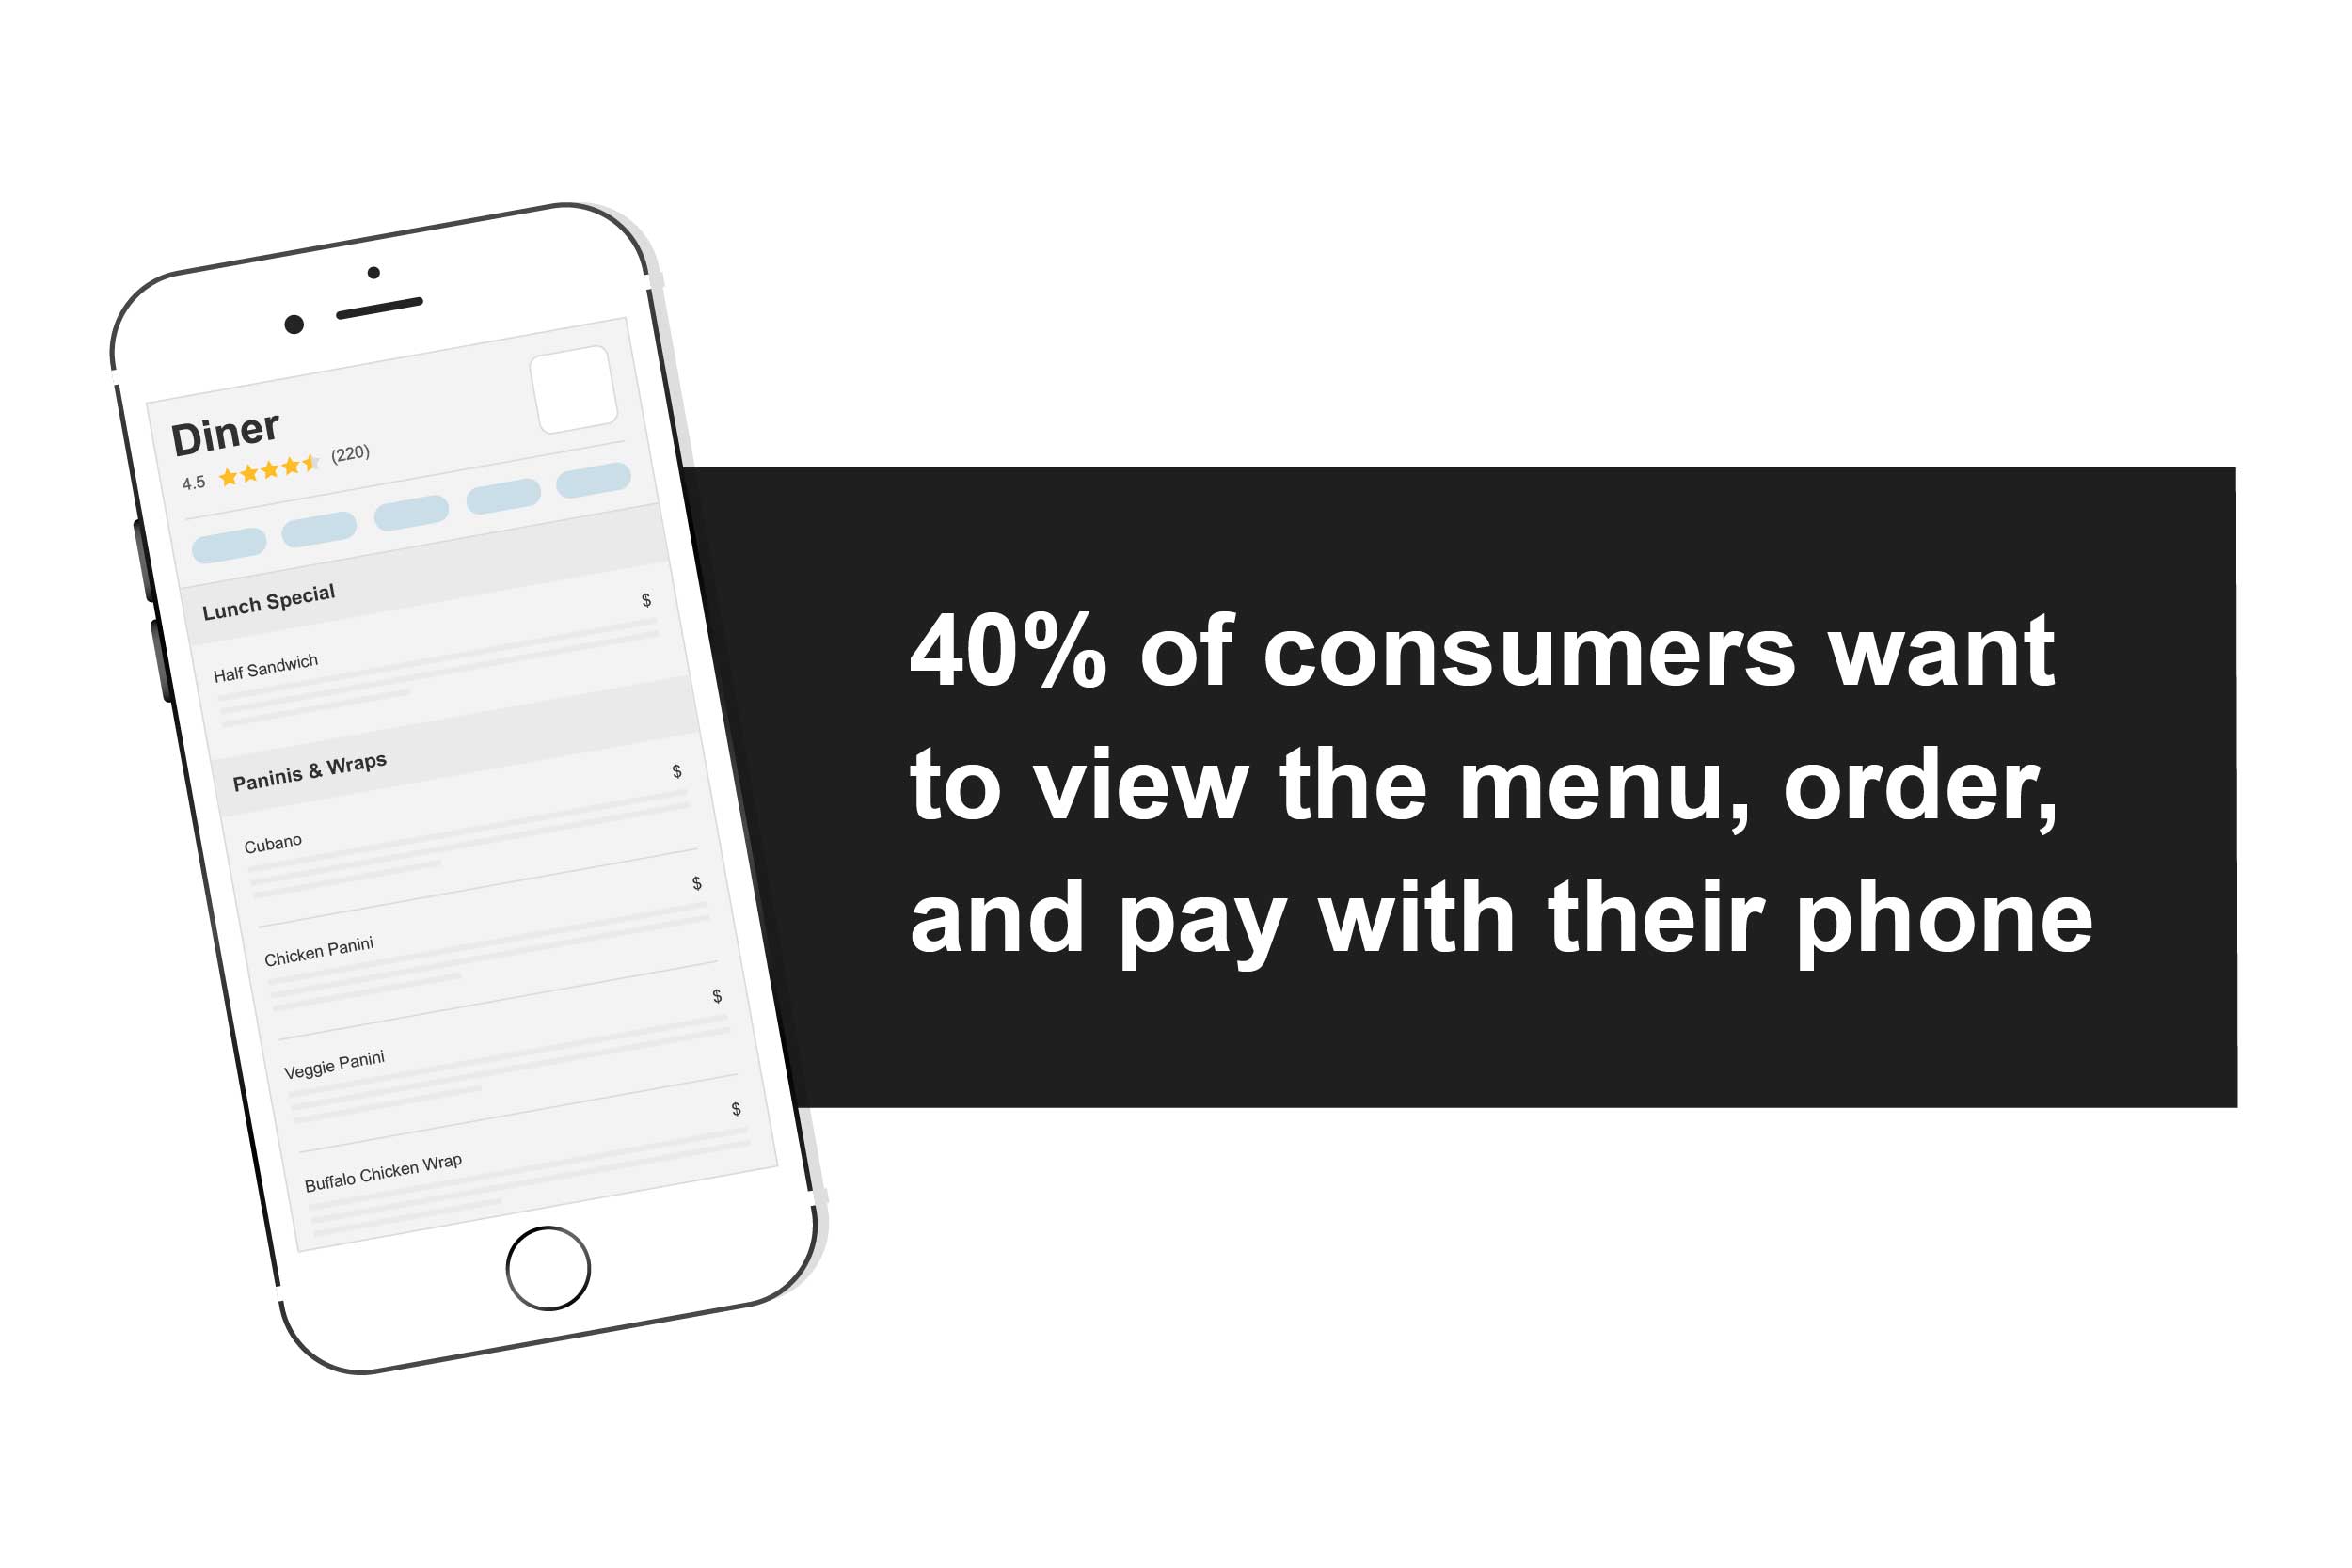 Forty percent of consumers want to view menus, order, and pay on their phone. 